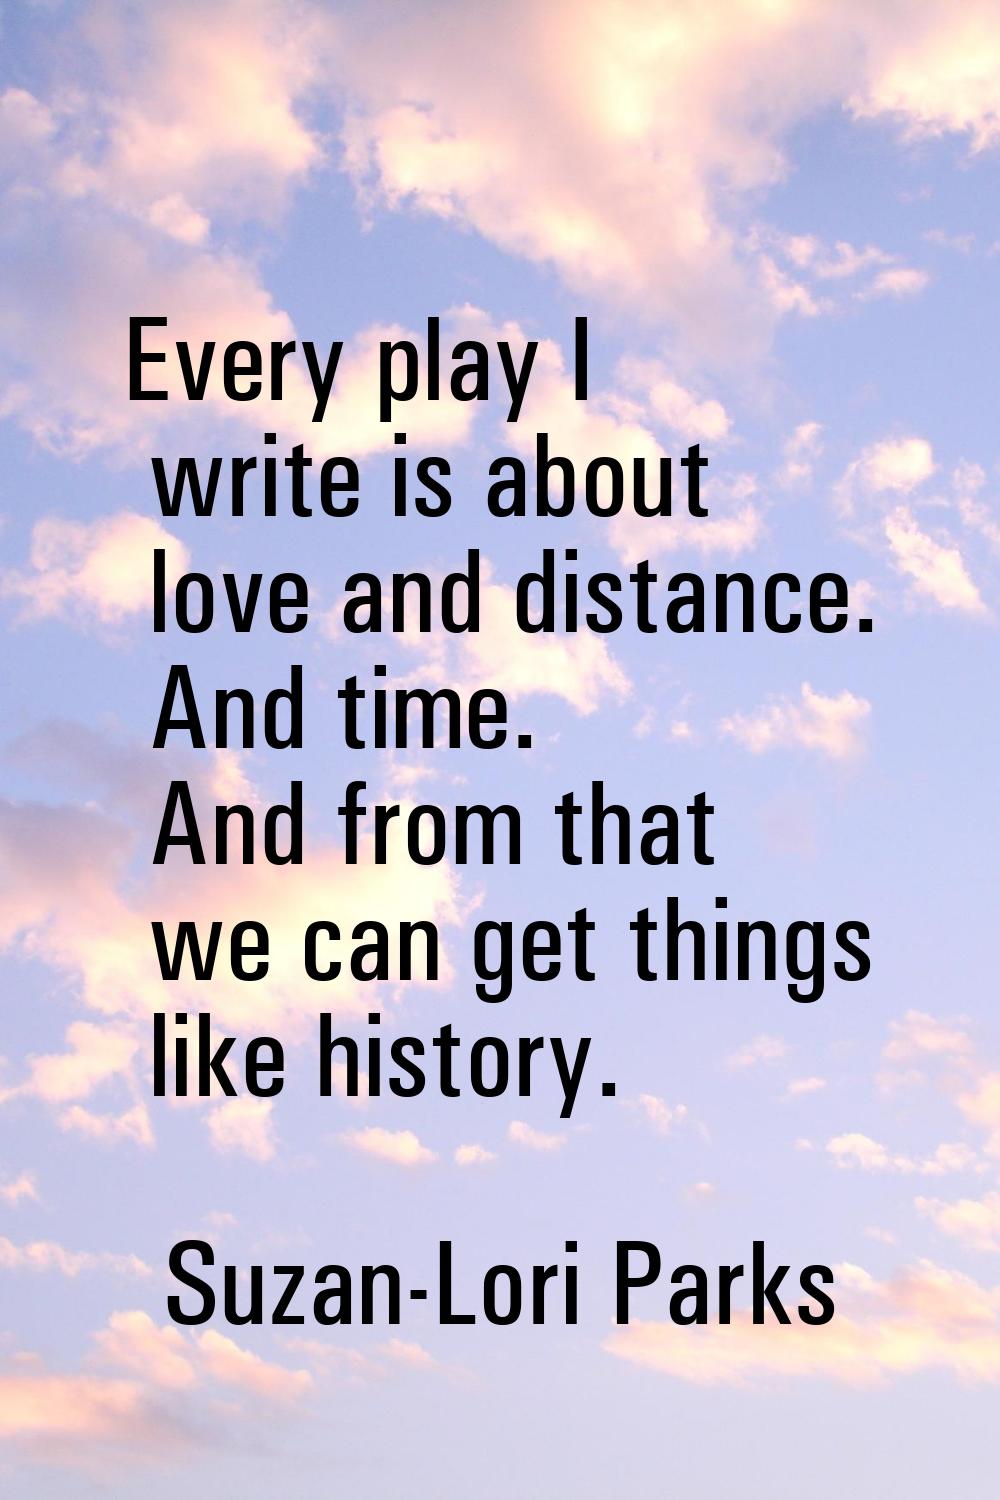 Every play I write is about love and distance. And time. And from that we can get things like histo